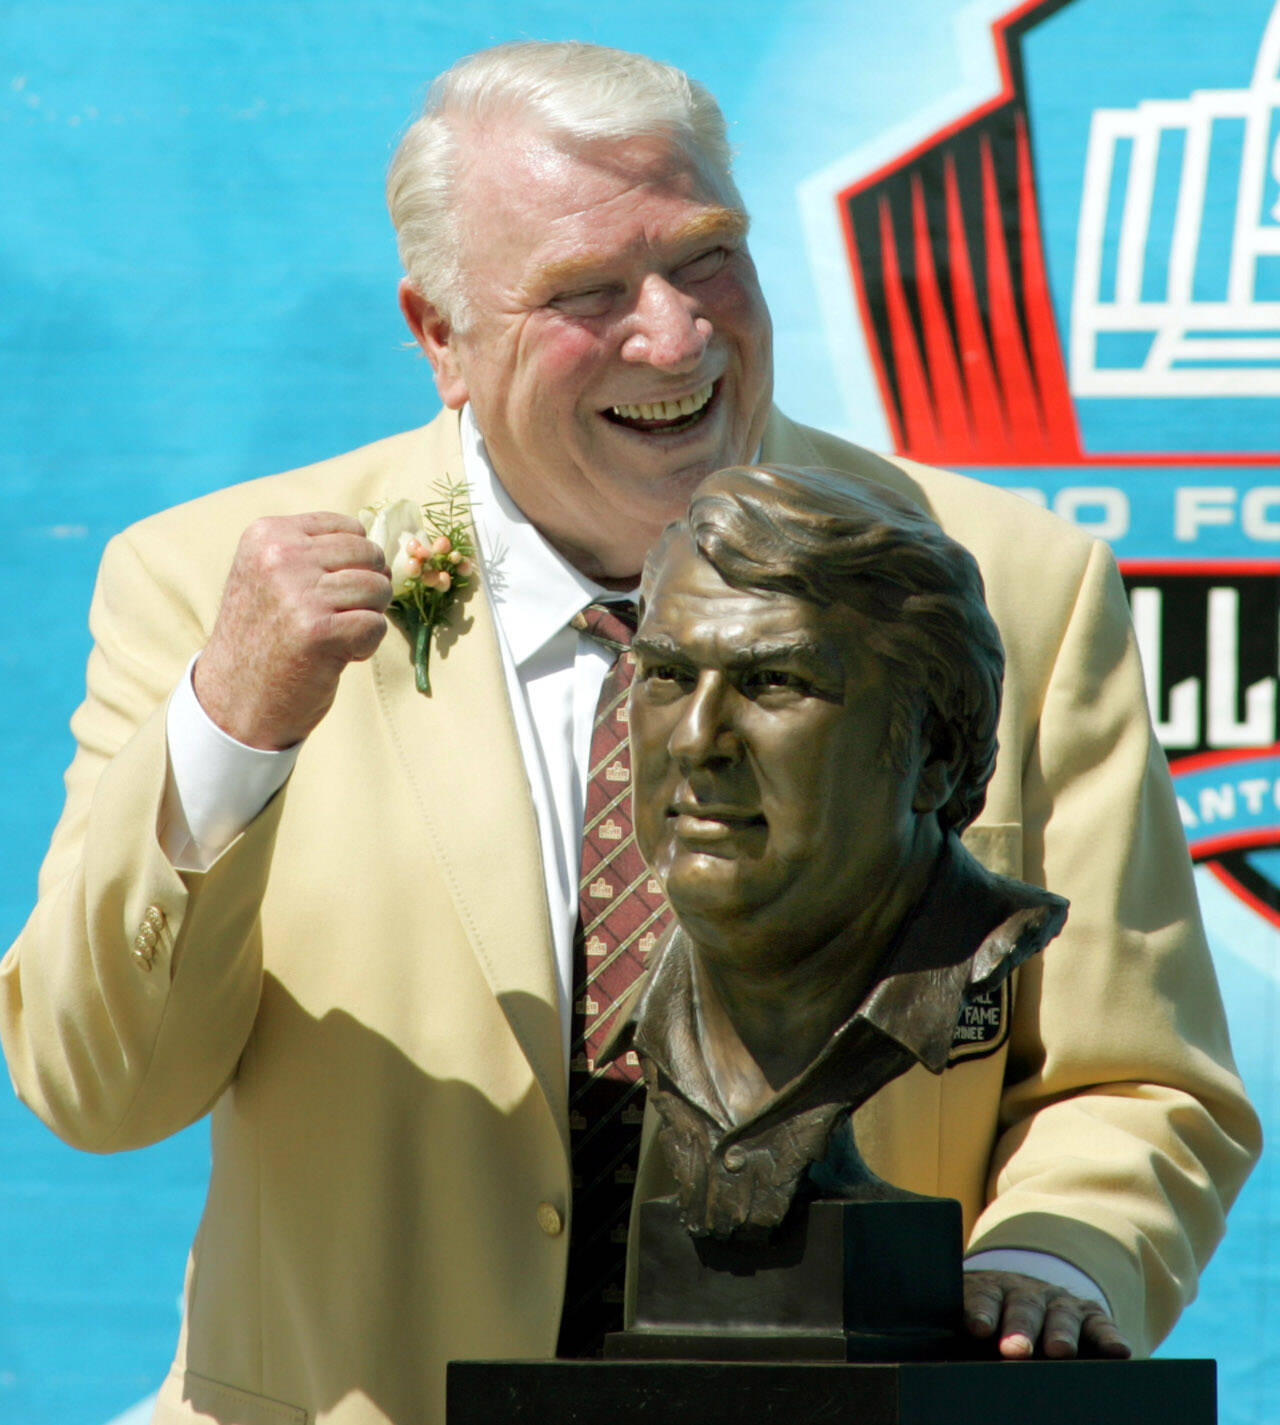 Ron Jenkins/Fort Worth Star-Telegram/TNS John Madden stands with his bust at the Pro Football Hall of Fame induction ceremony on Saturday, August 5, 2006, in Canton, Ohio. Madden, who played football at Grays Harbor College in 1956, passed away Tuesday at the age of 85.